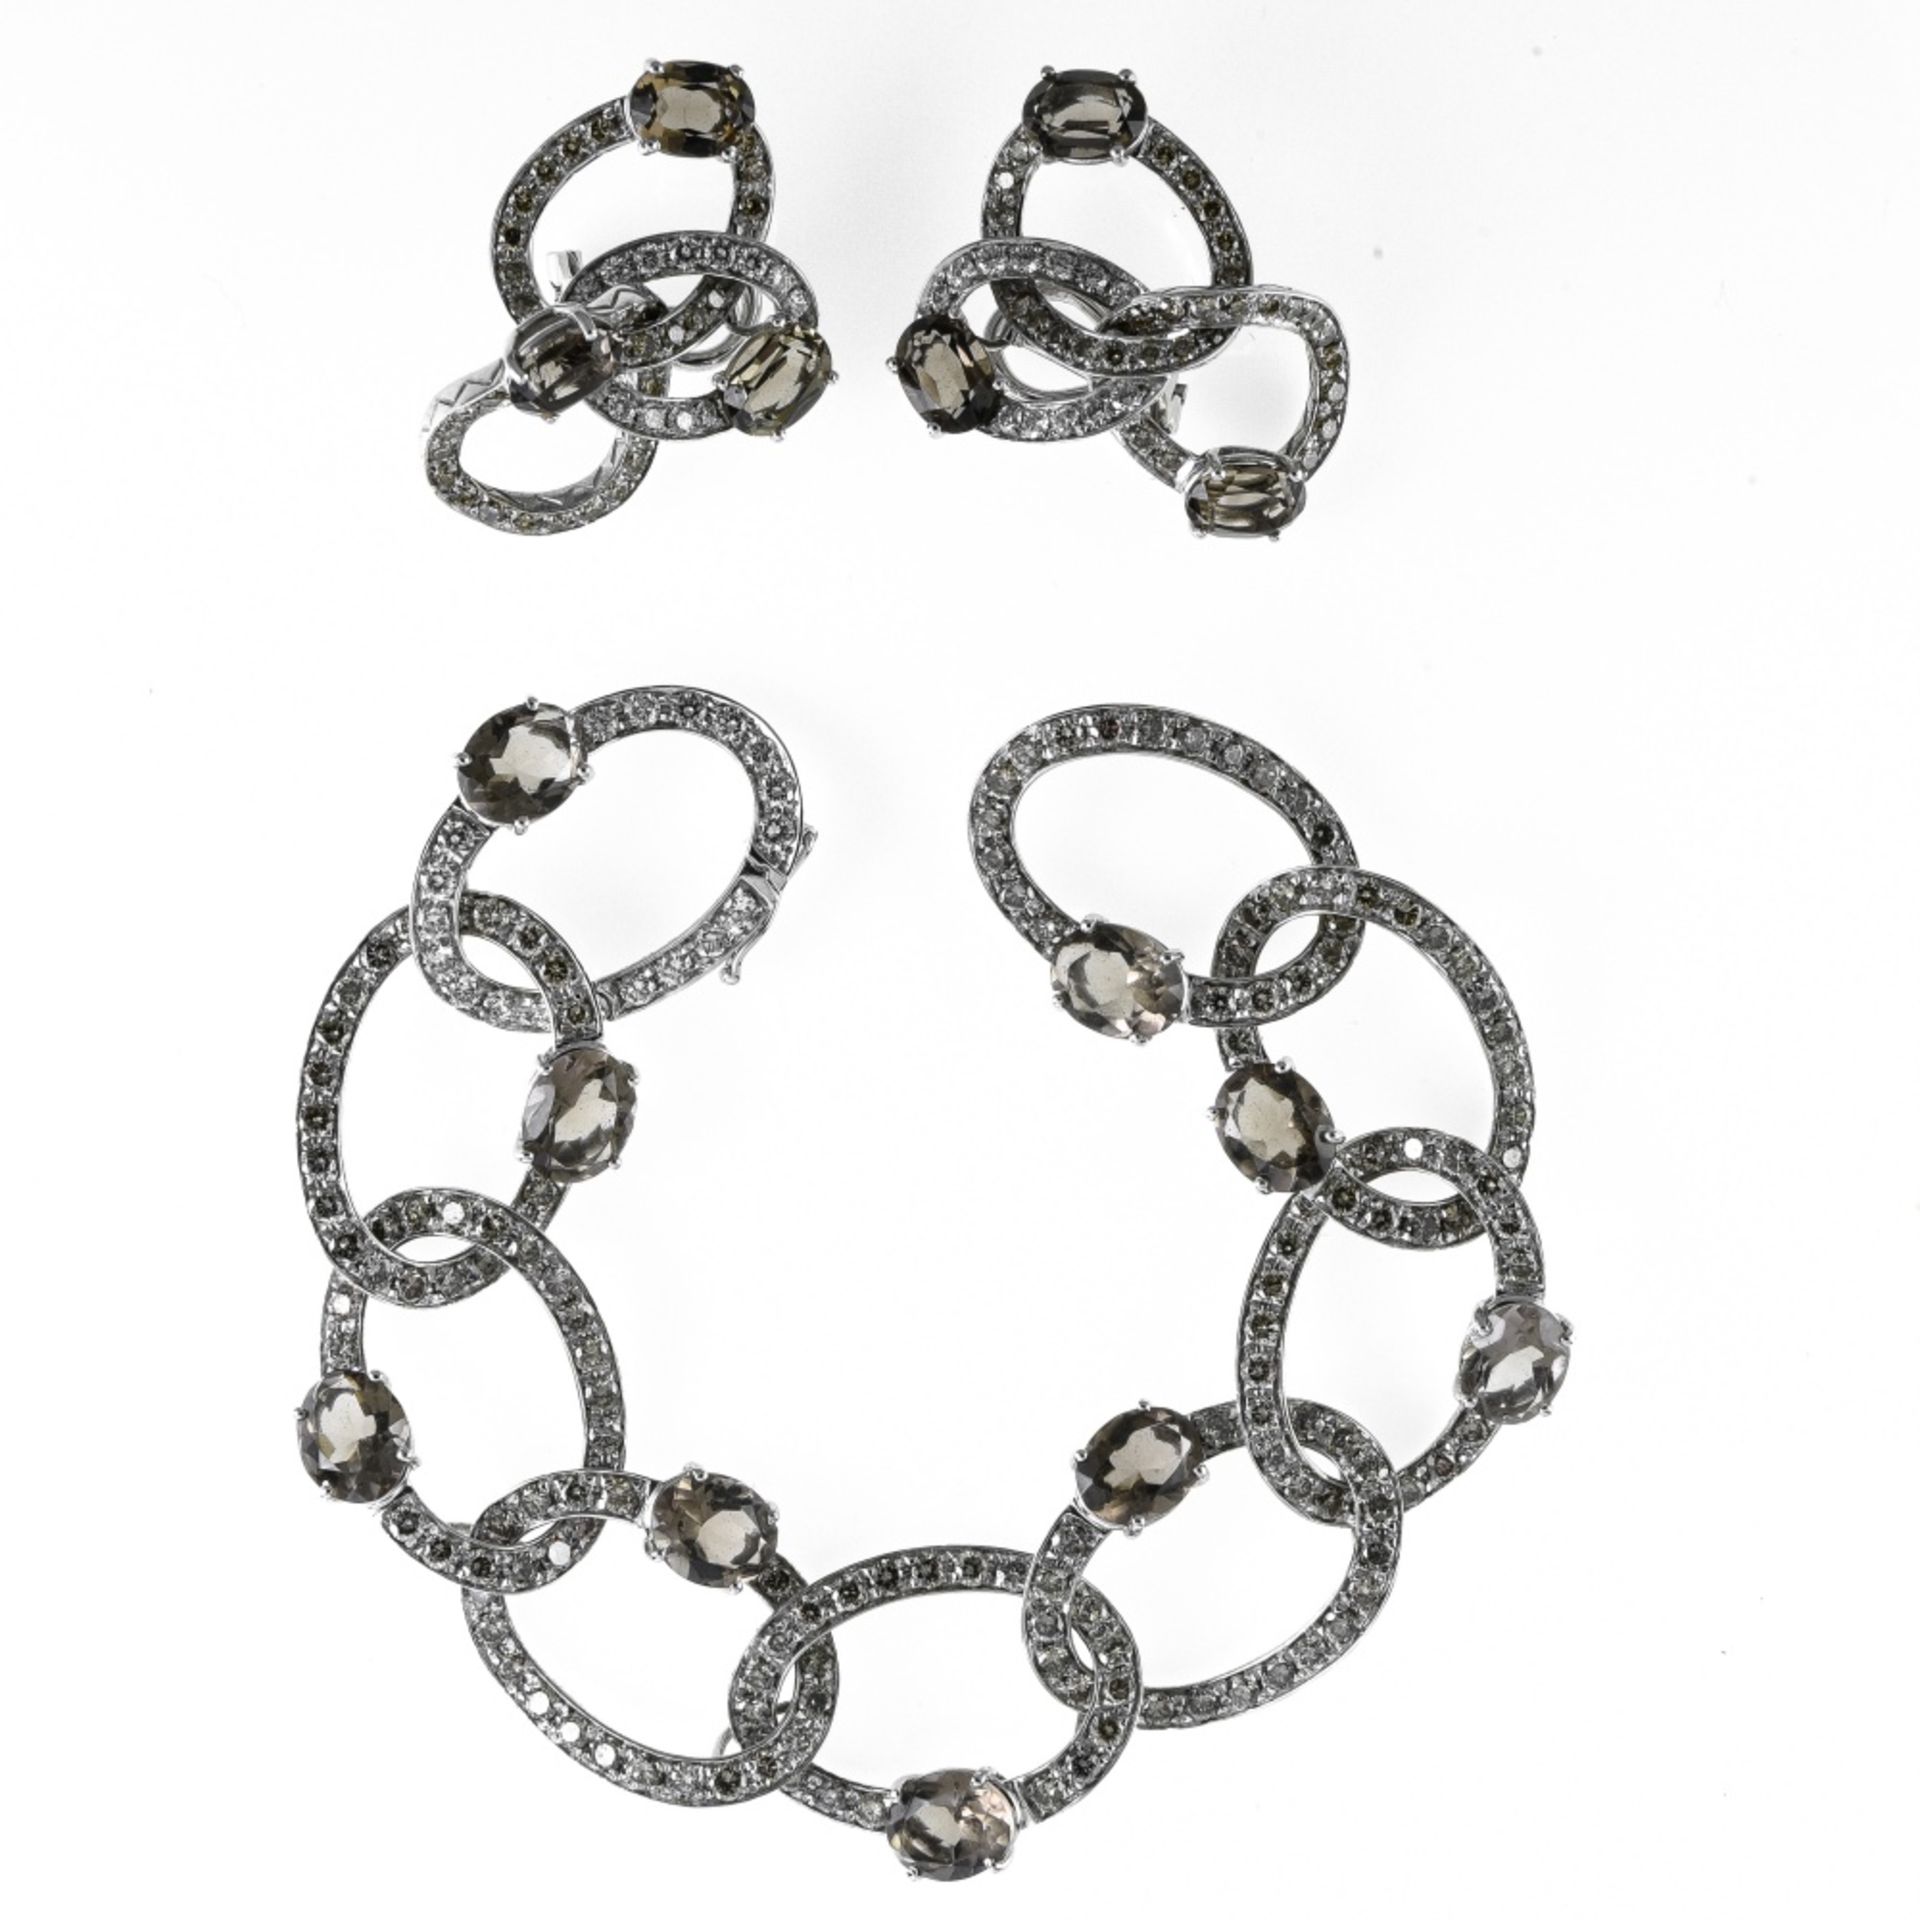 Robotti Demi-parure 18 kt white gold, composed of a bracelet and a pair of drop earrings set with